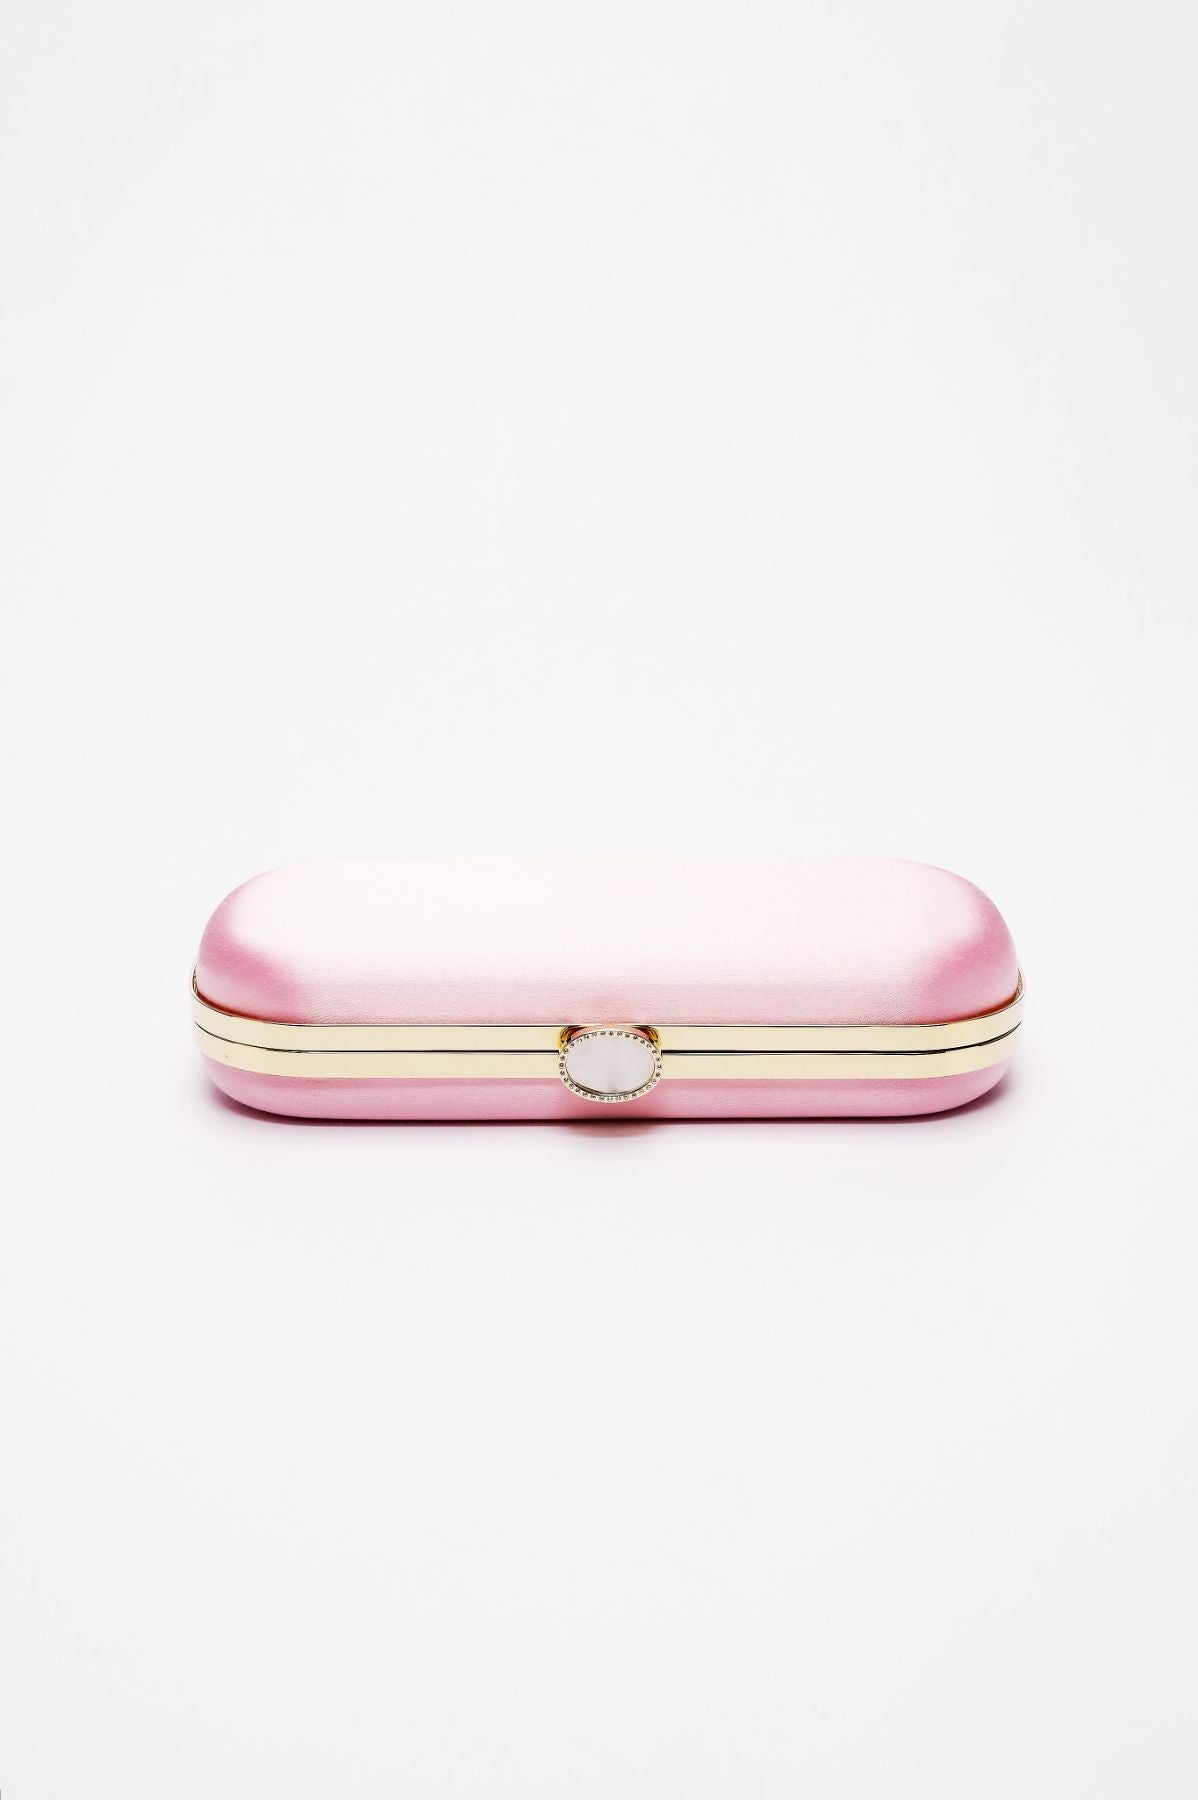 Pink Bella Clutch Petite eyeglasses case from The Bella Rosa Collection against a white background.